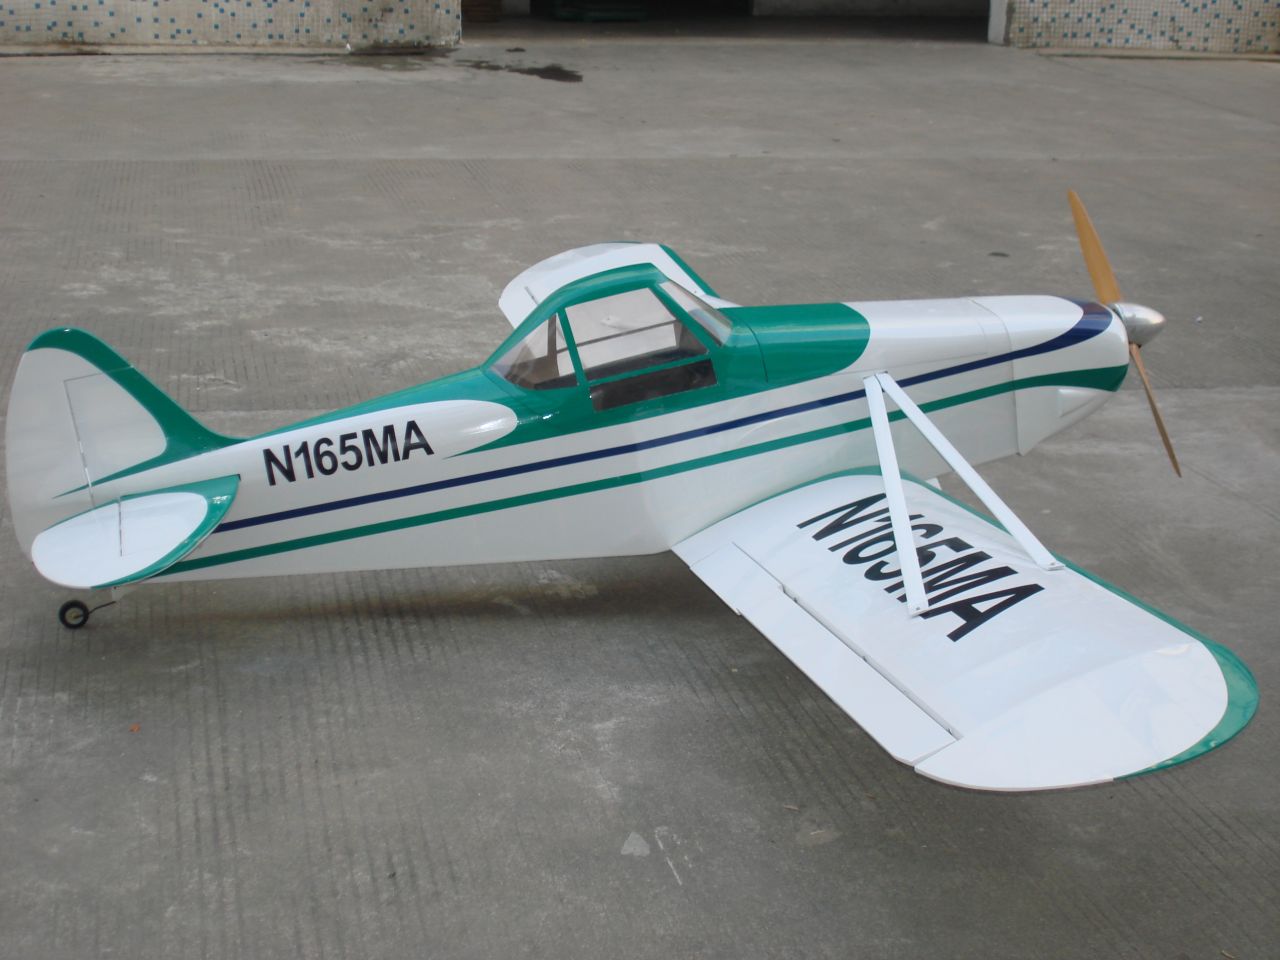 piper%20pawnee%20low%20wing%20agricultural%20wooden%20construction%20model%20plane%20for%2026-35cc